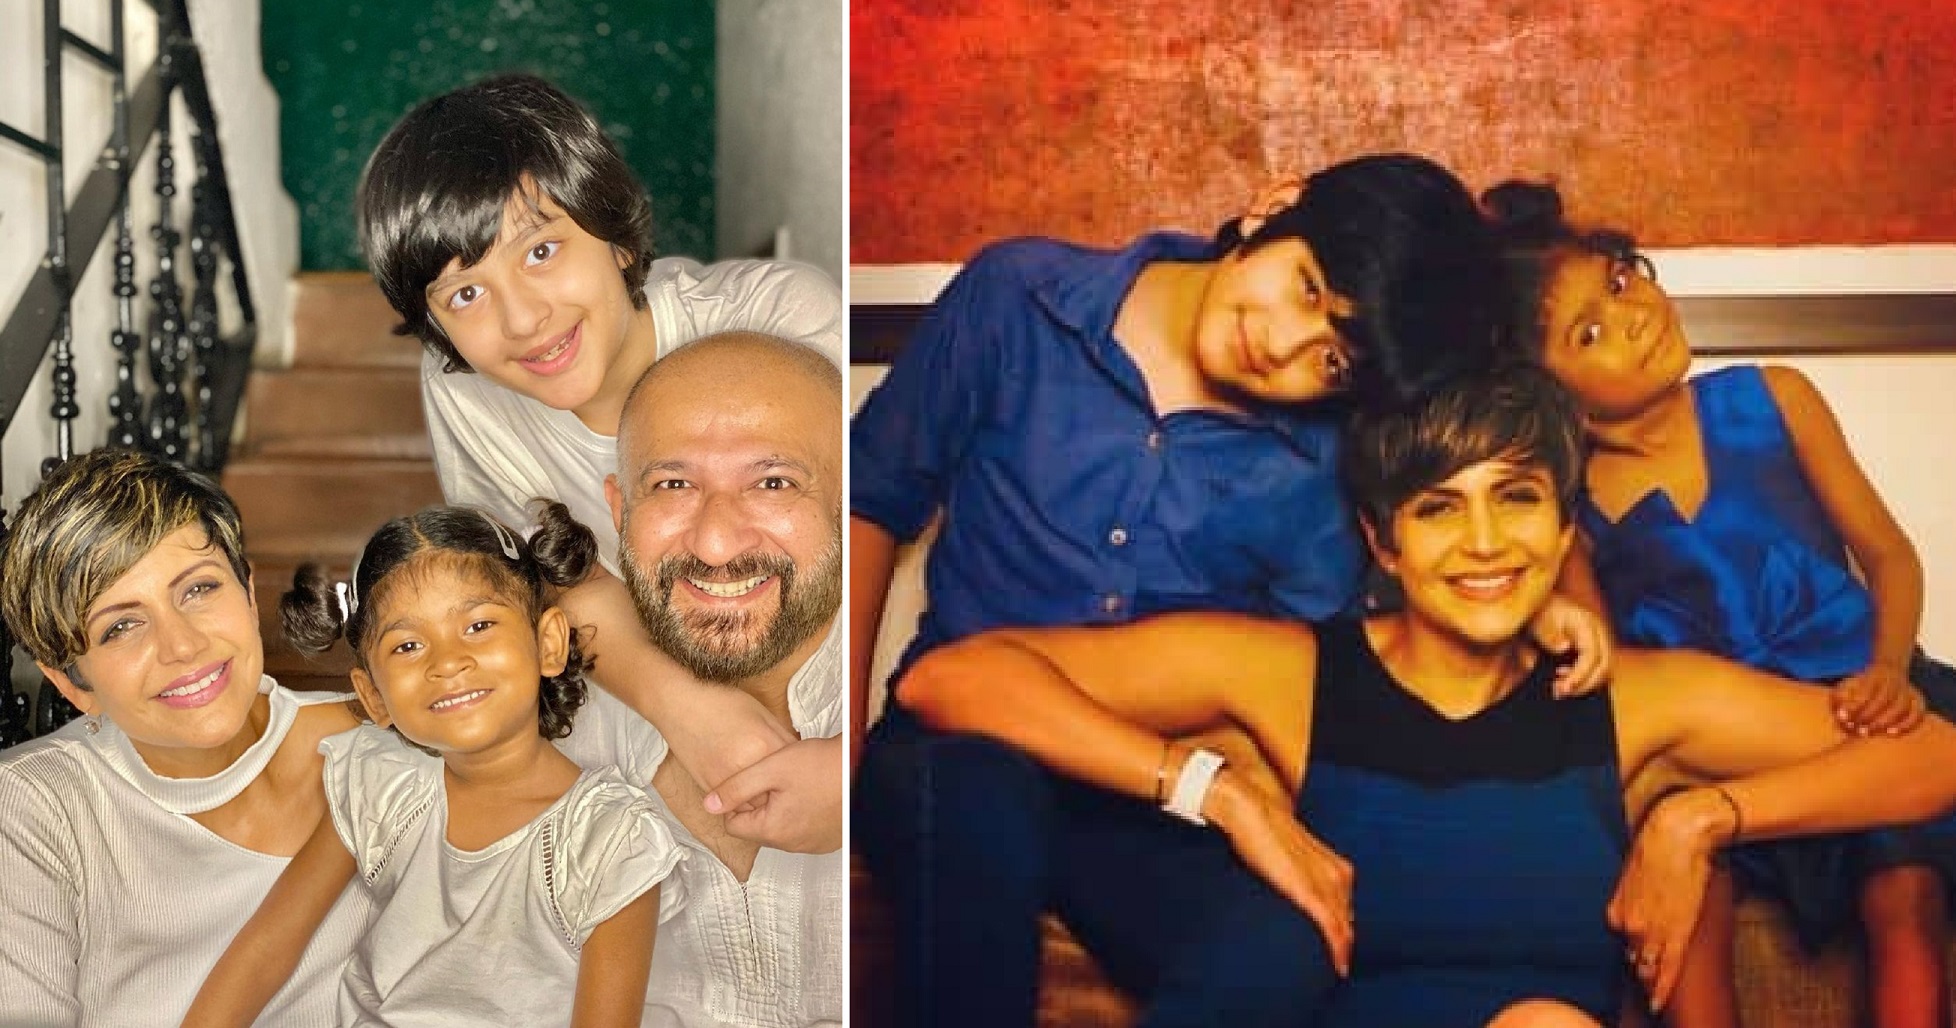 Mandira Bedi Was Asked ‘From which slumdog centre did you adopt your daughter?’ By an Internet Troll, And Here’s How She Put Him To His Place…